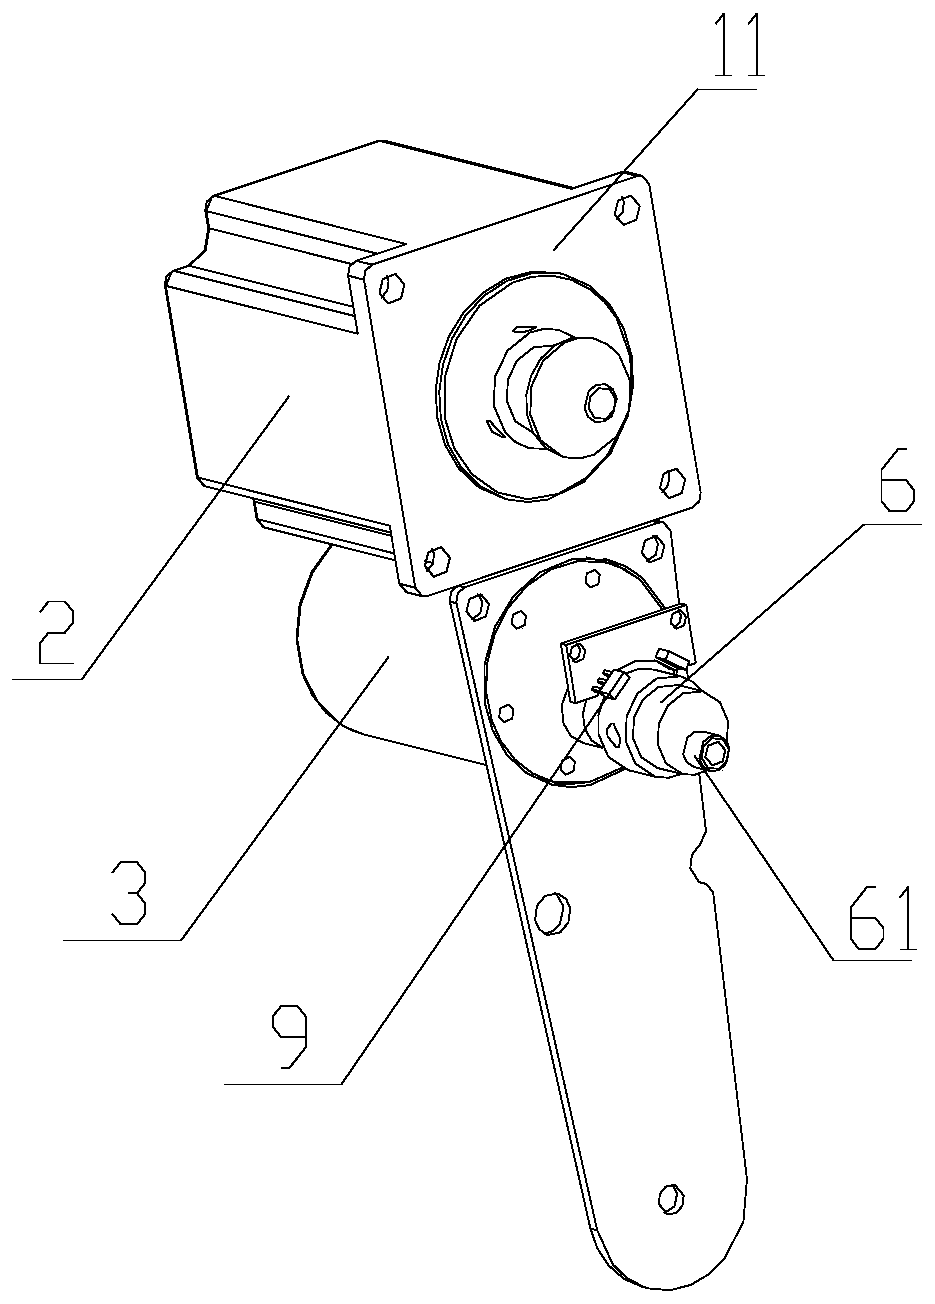 Cloth pulling wheel device capable of being slightly adjusted for sewing machine